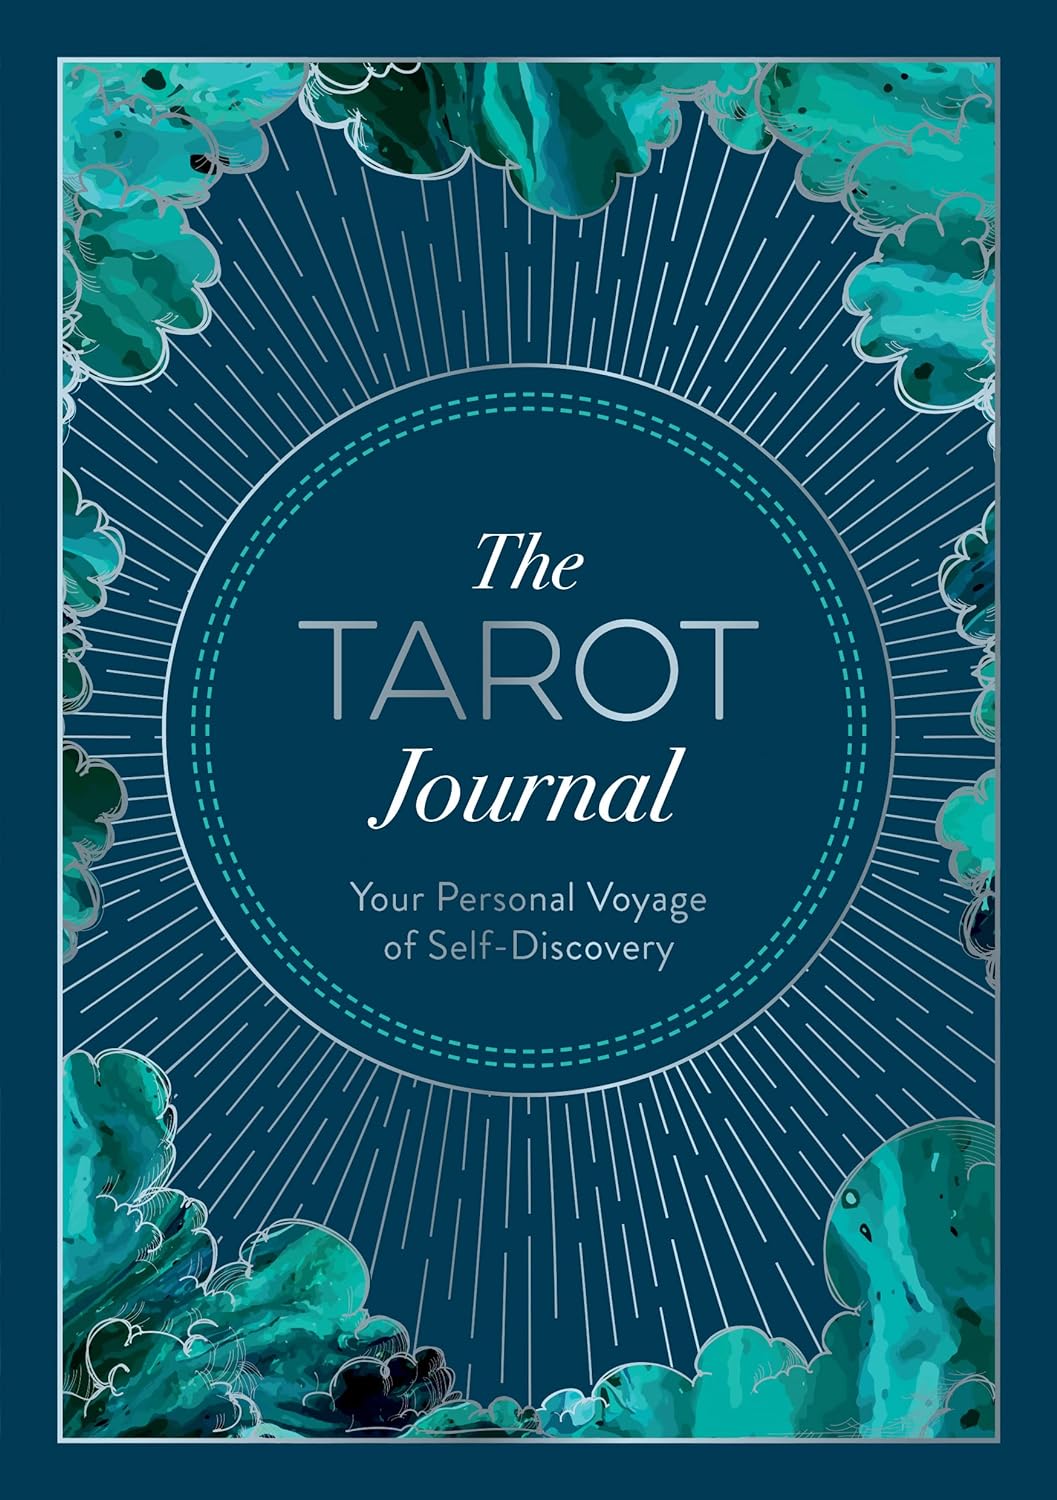 Tarot Journal Voyage Of Self-Discovery